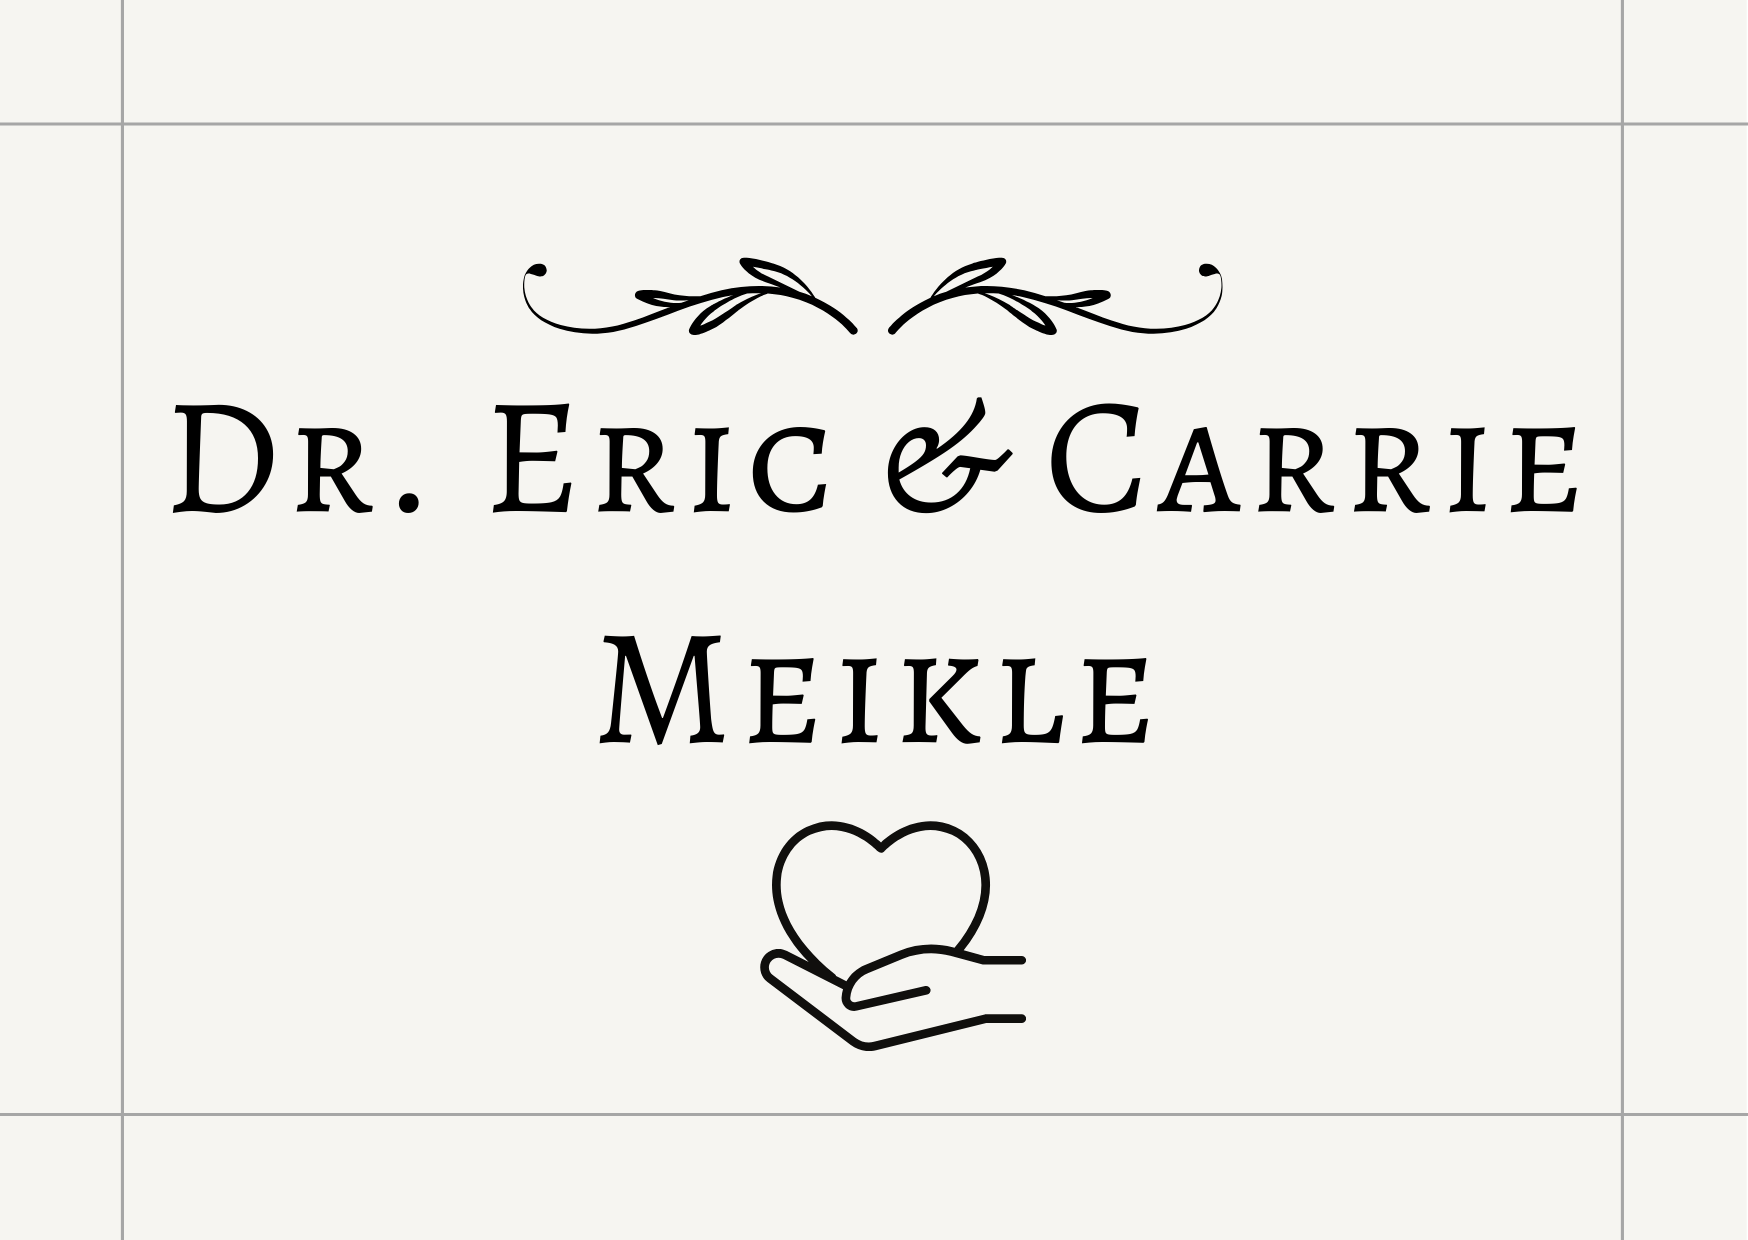 Carrie and Eric Meikle